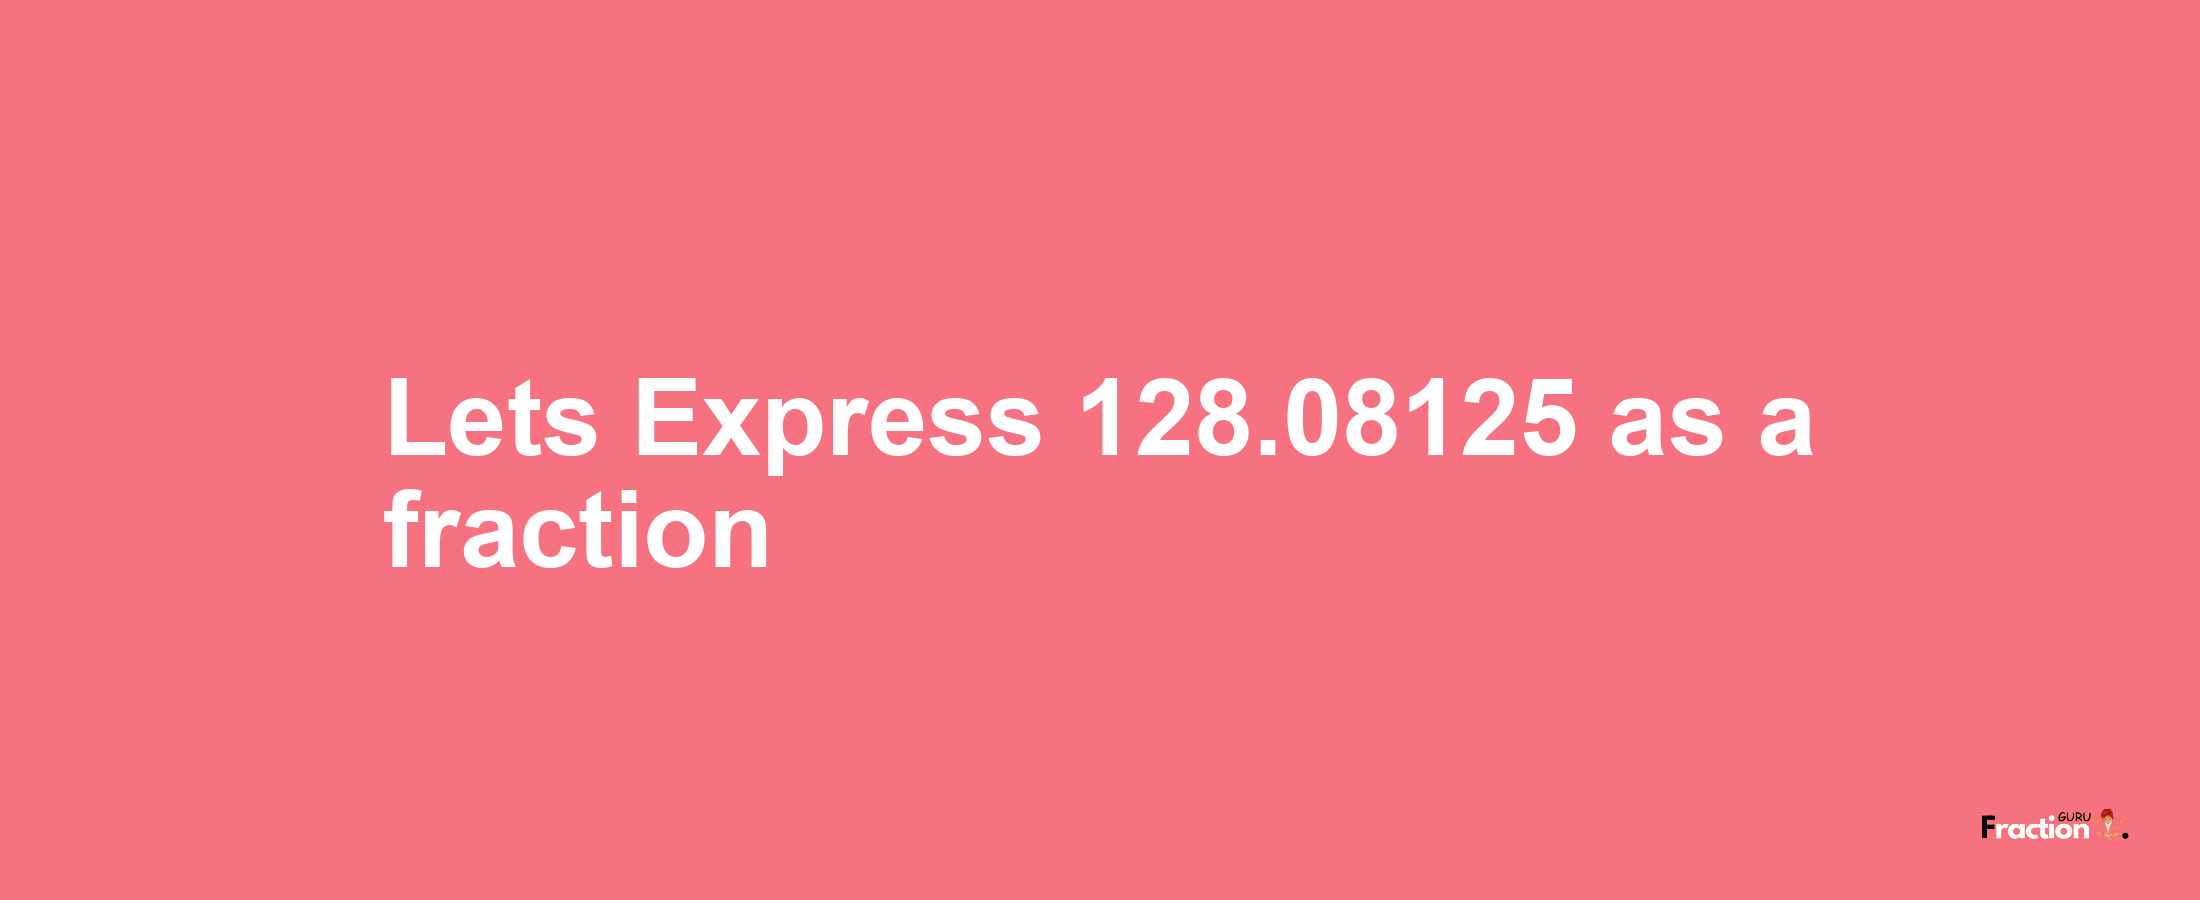 Lets Express 128.08125 as afraction